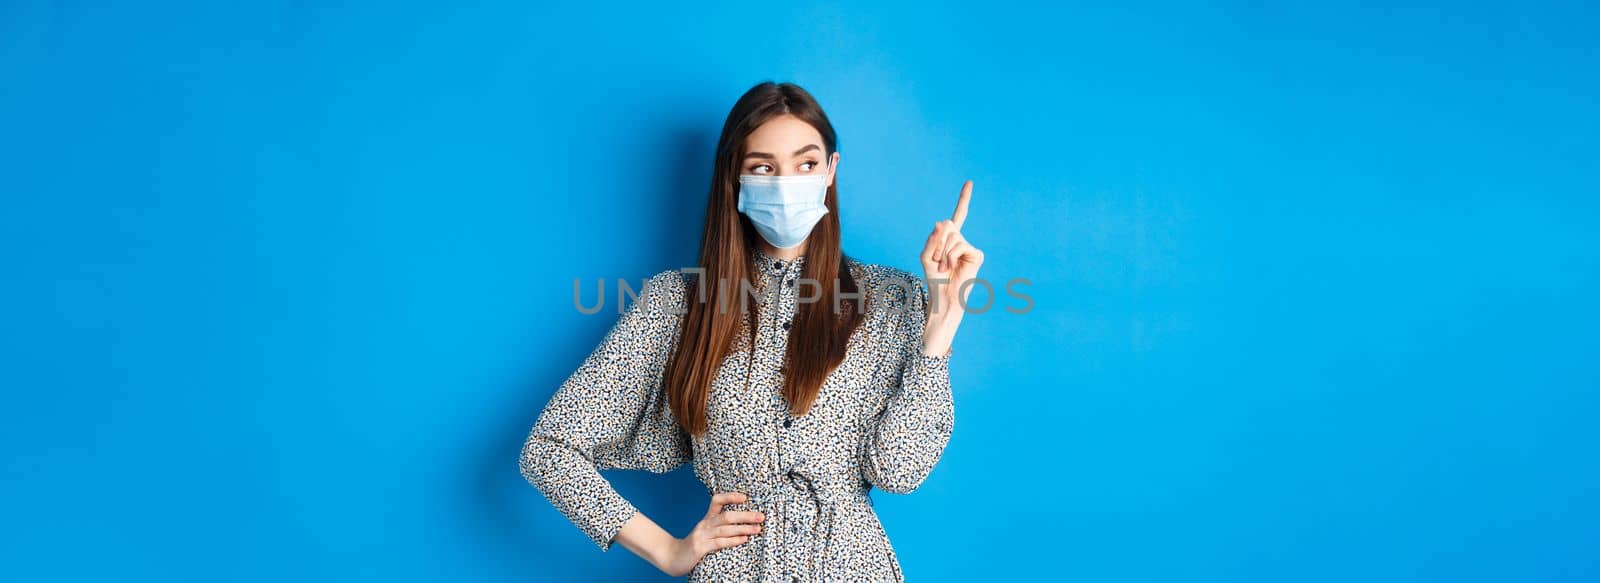 Healthy people and covid-19 pandemic concept. Curious girl in medical mask pointing at upper left corner, standing on blue background.